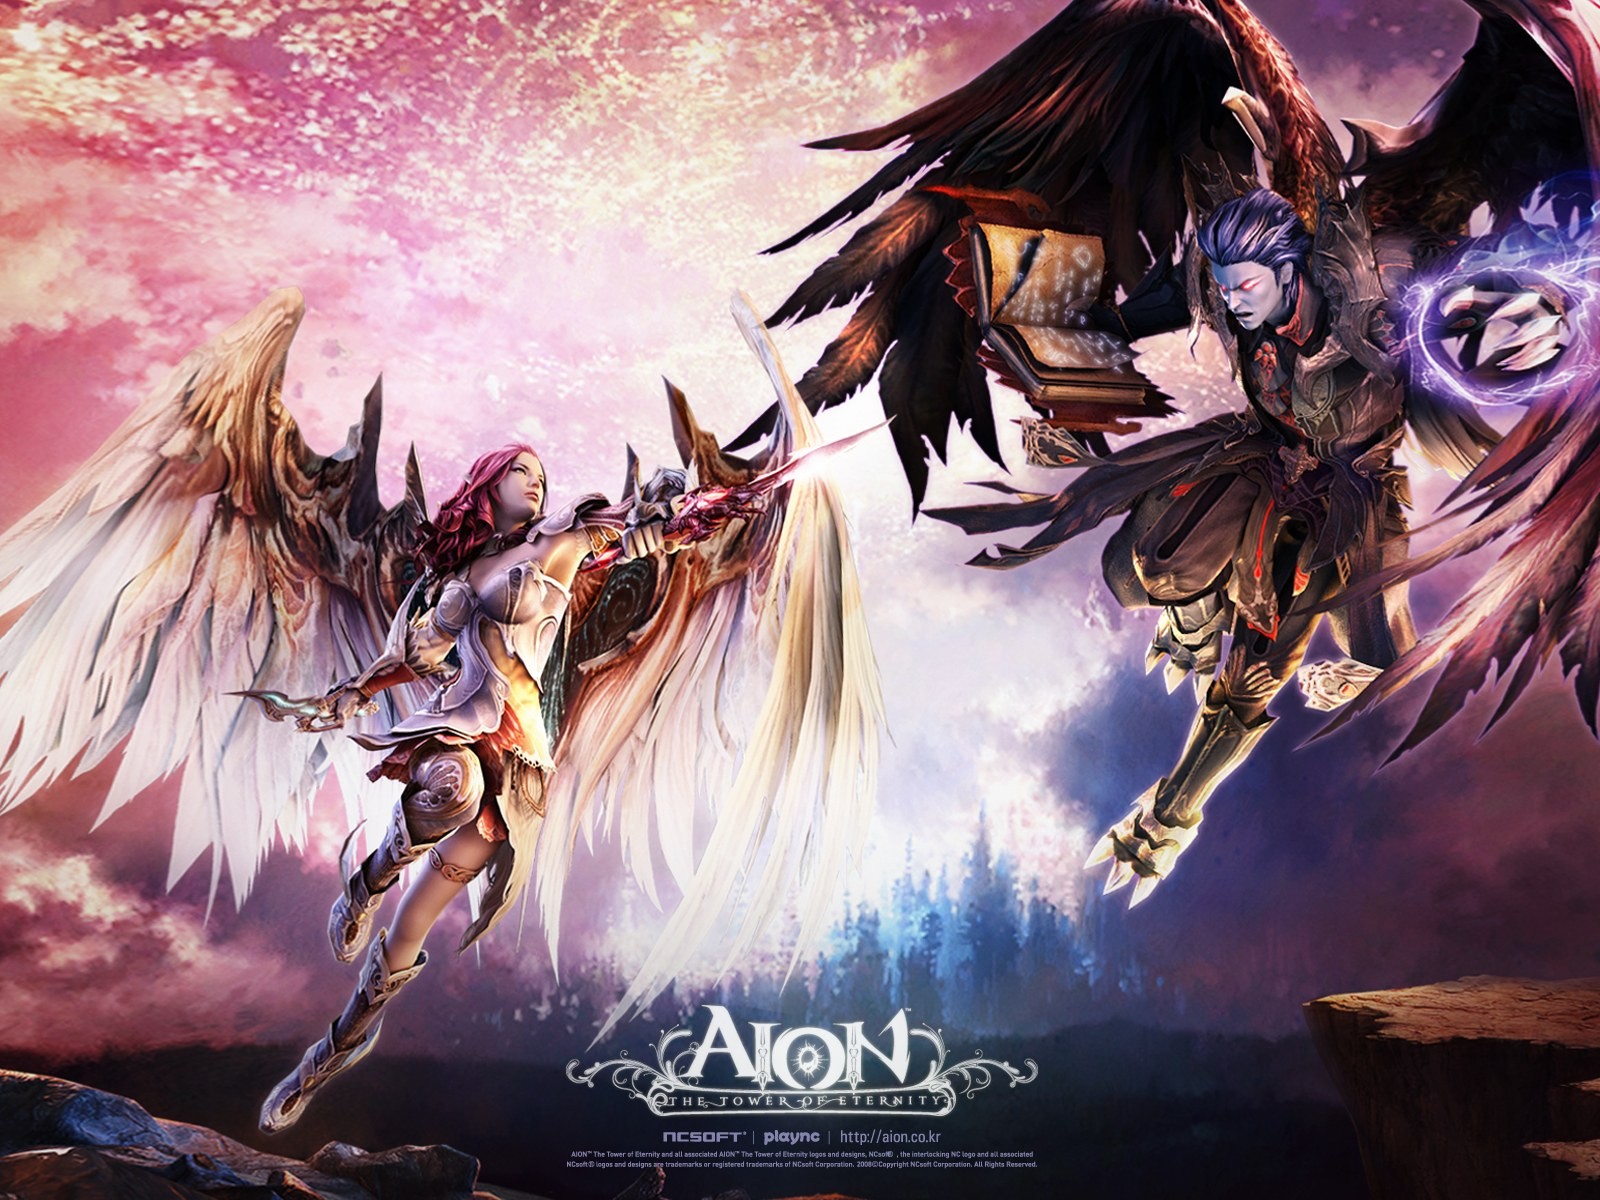 Aion modeling HD gaming wallpapers #15 - 1600x1200